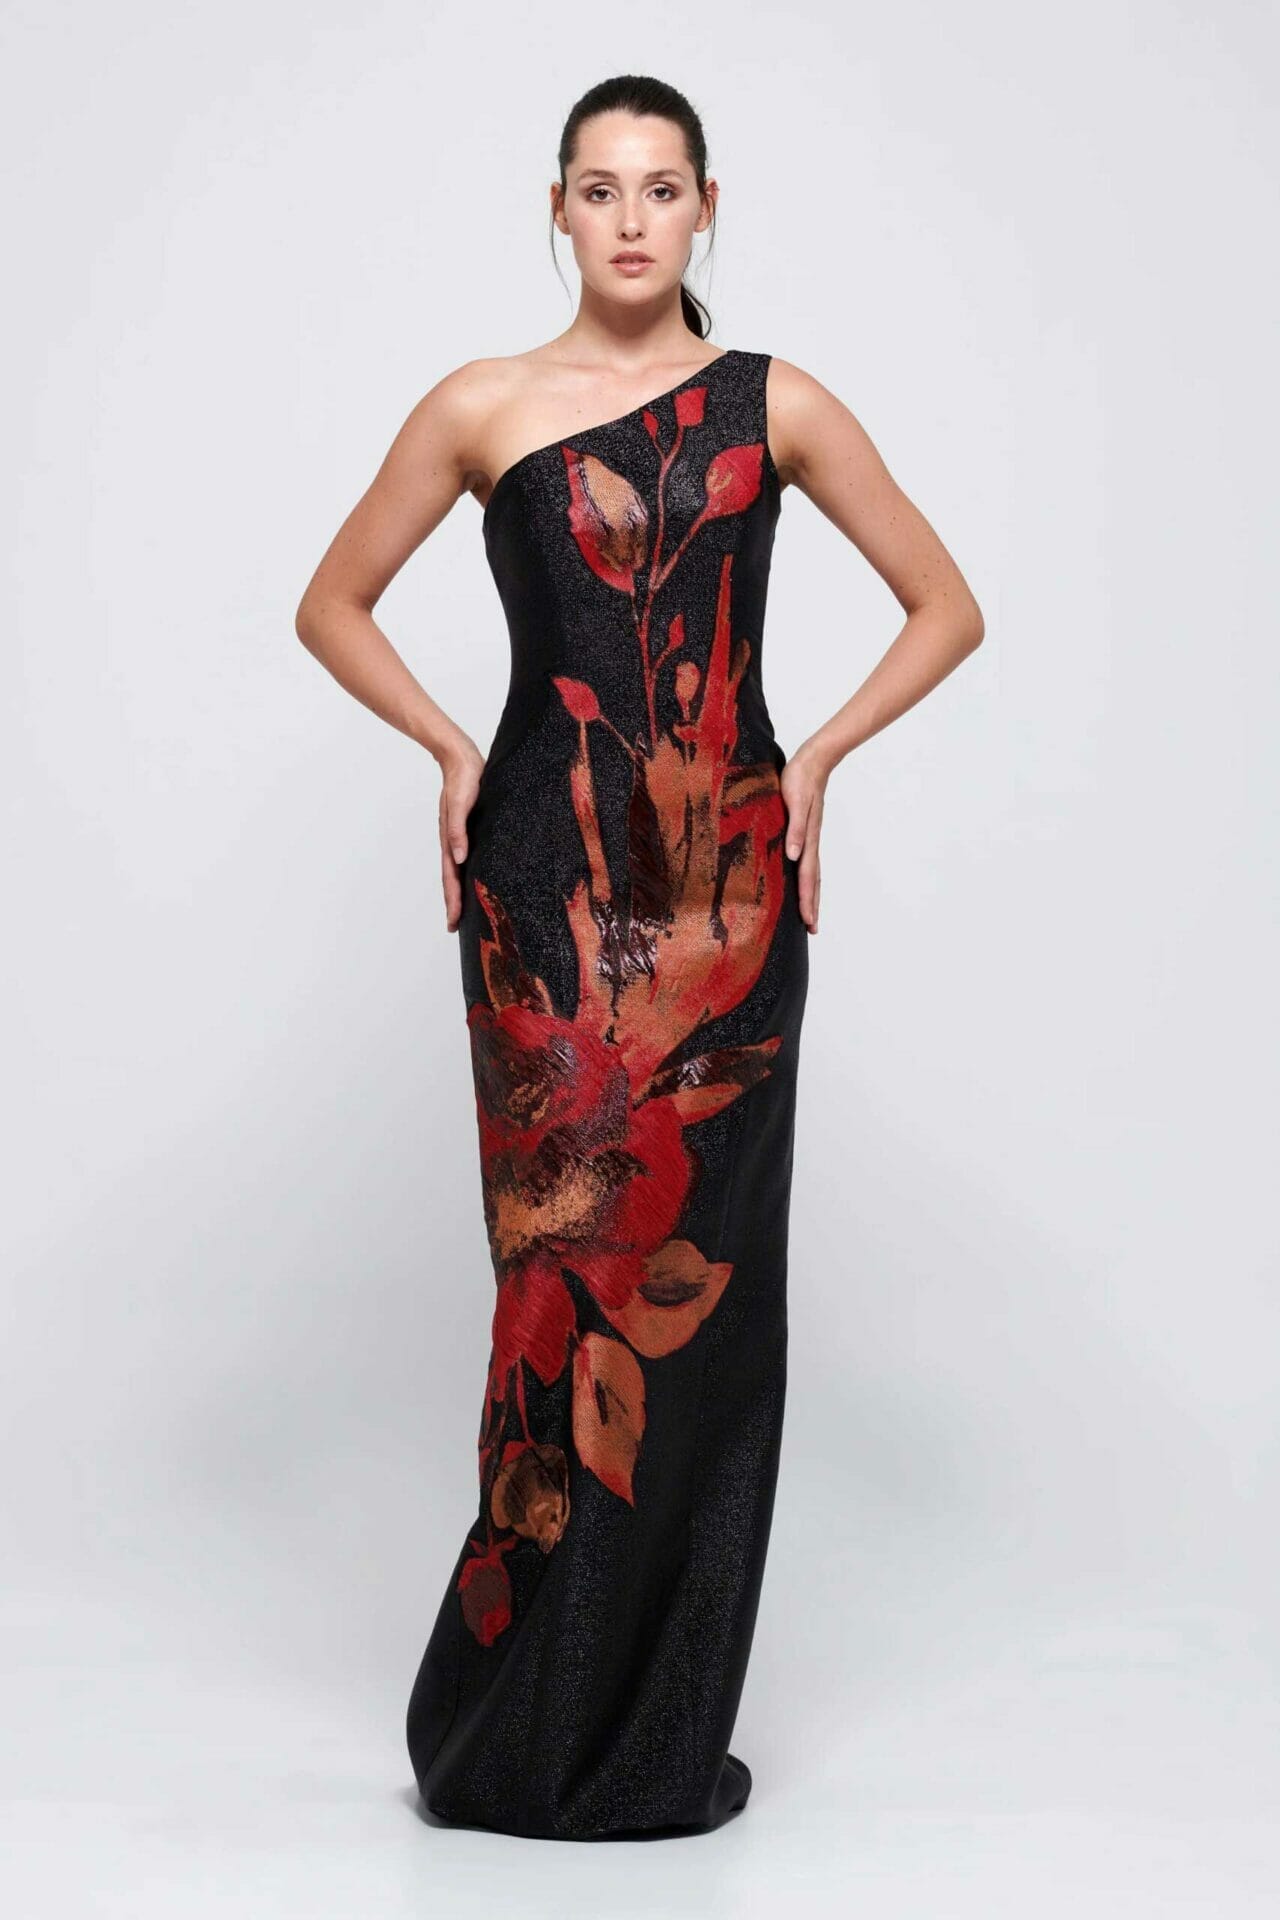 The model is wearing a black gown with red and black floral print